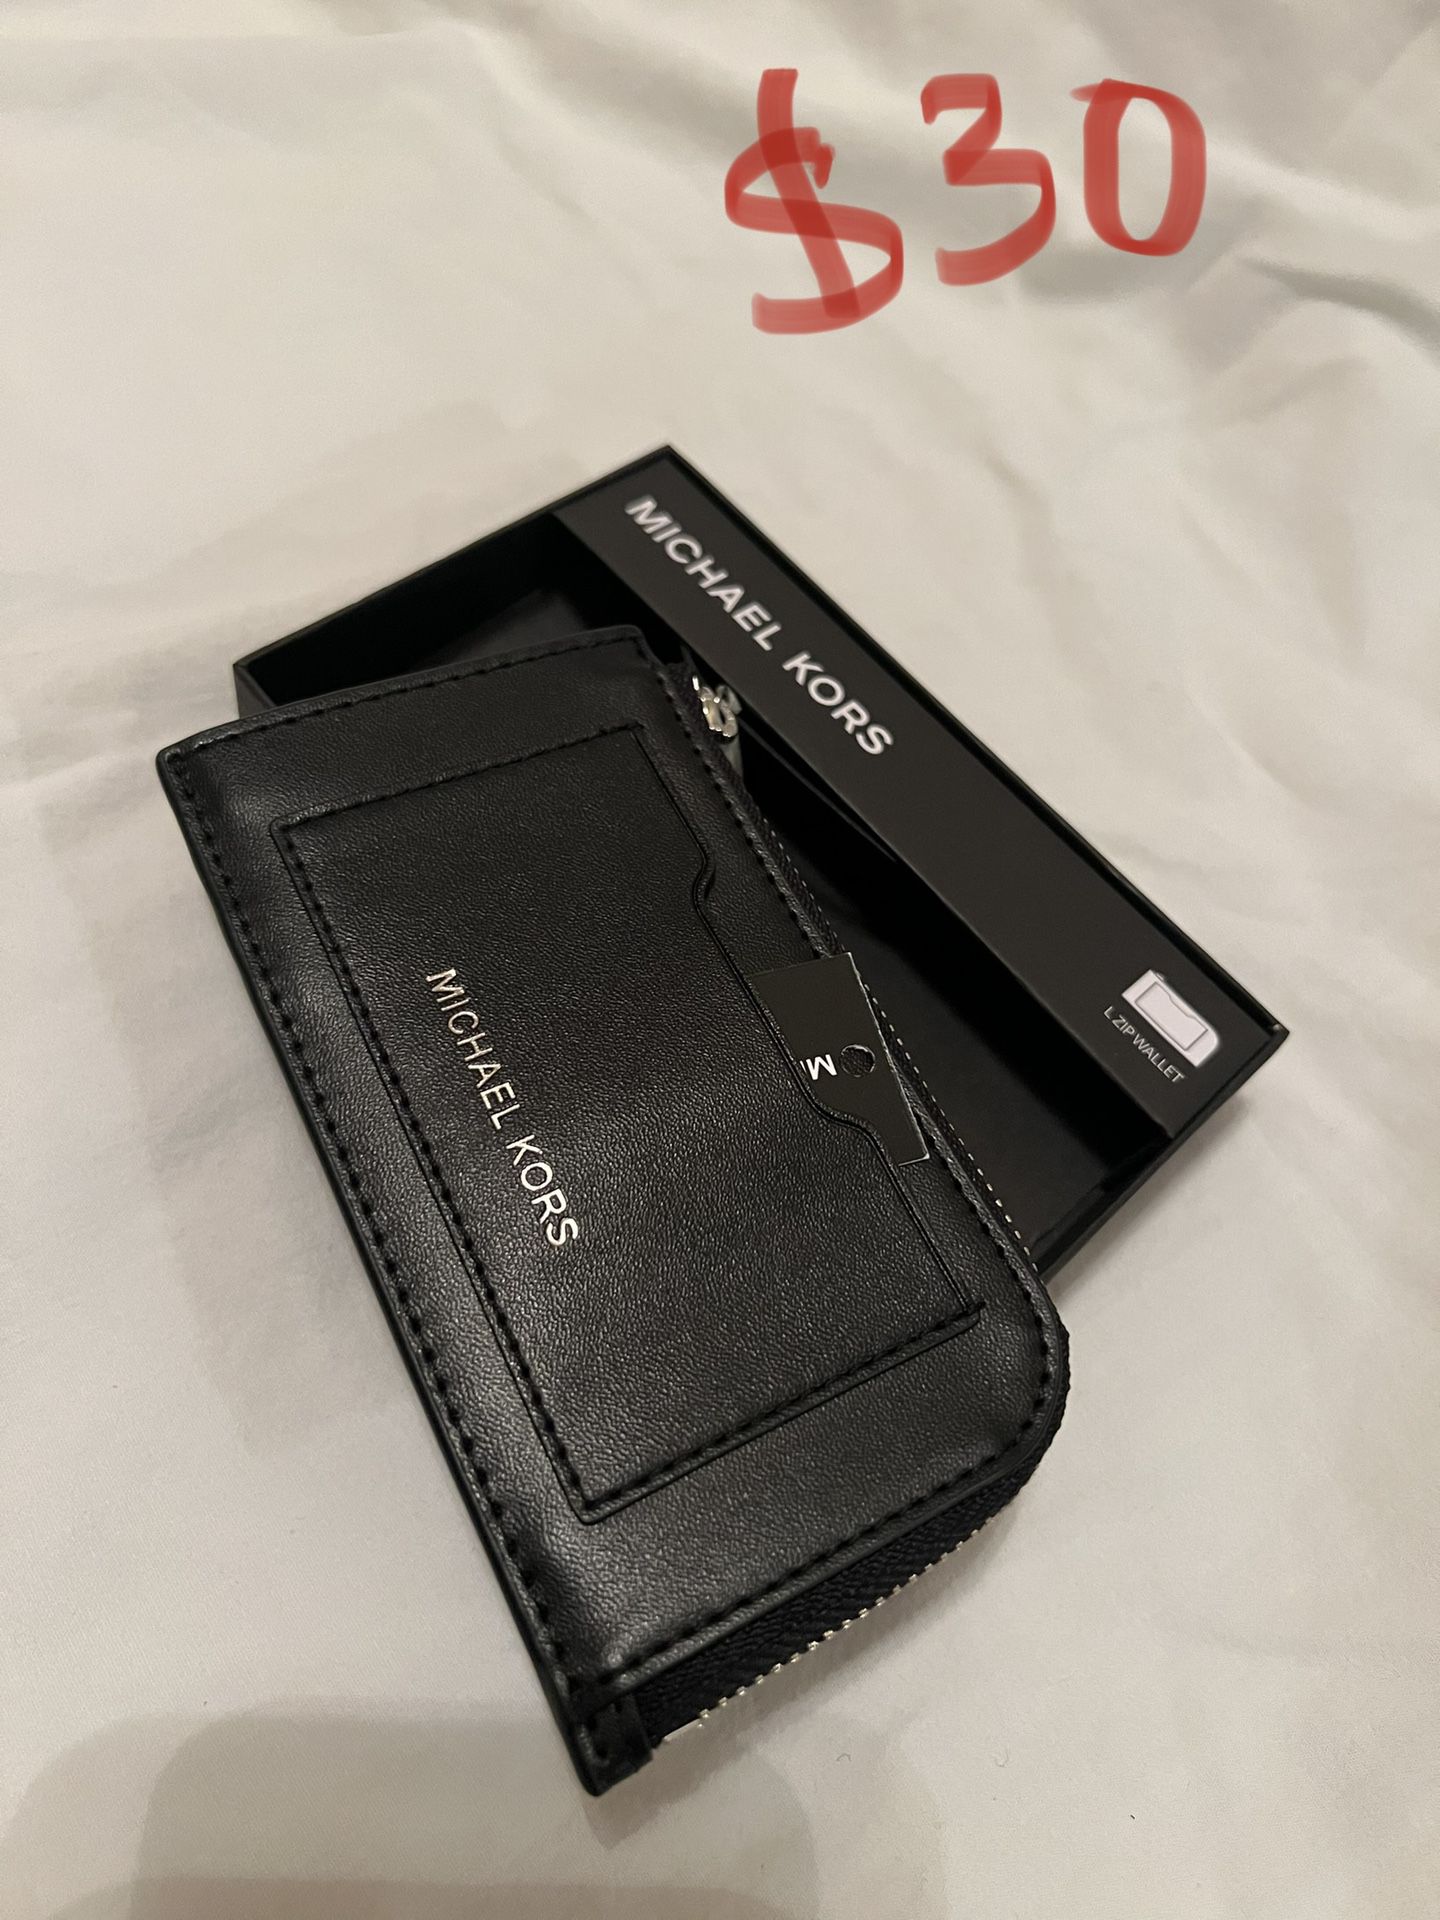 BRAND NEW IN A BOX AUTHENTIC MICHAEL KORS JET SET MENS WALLET for Sale in  Wadsworth, IL - OfferUp